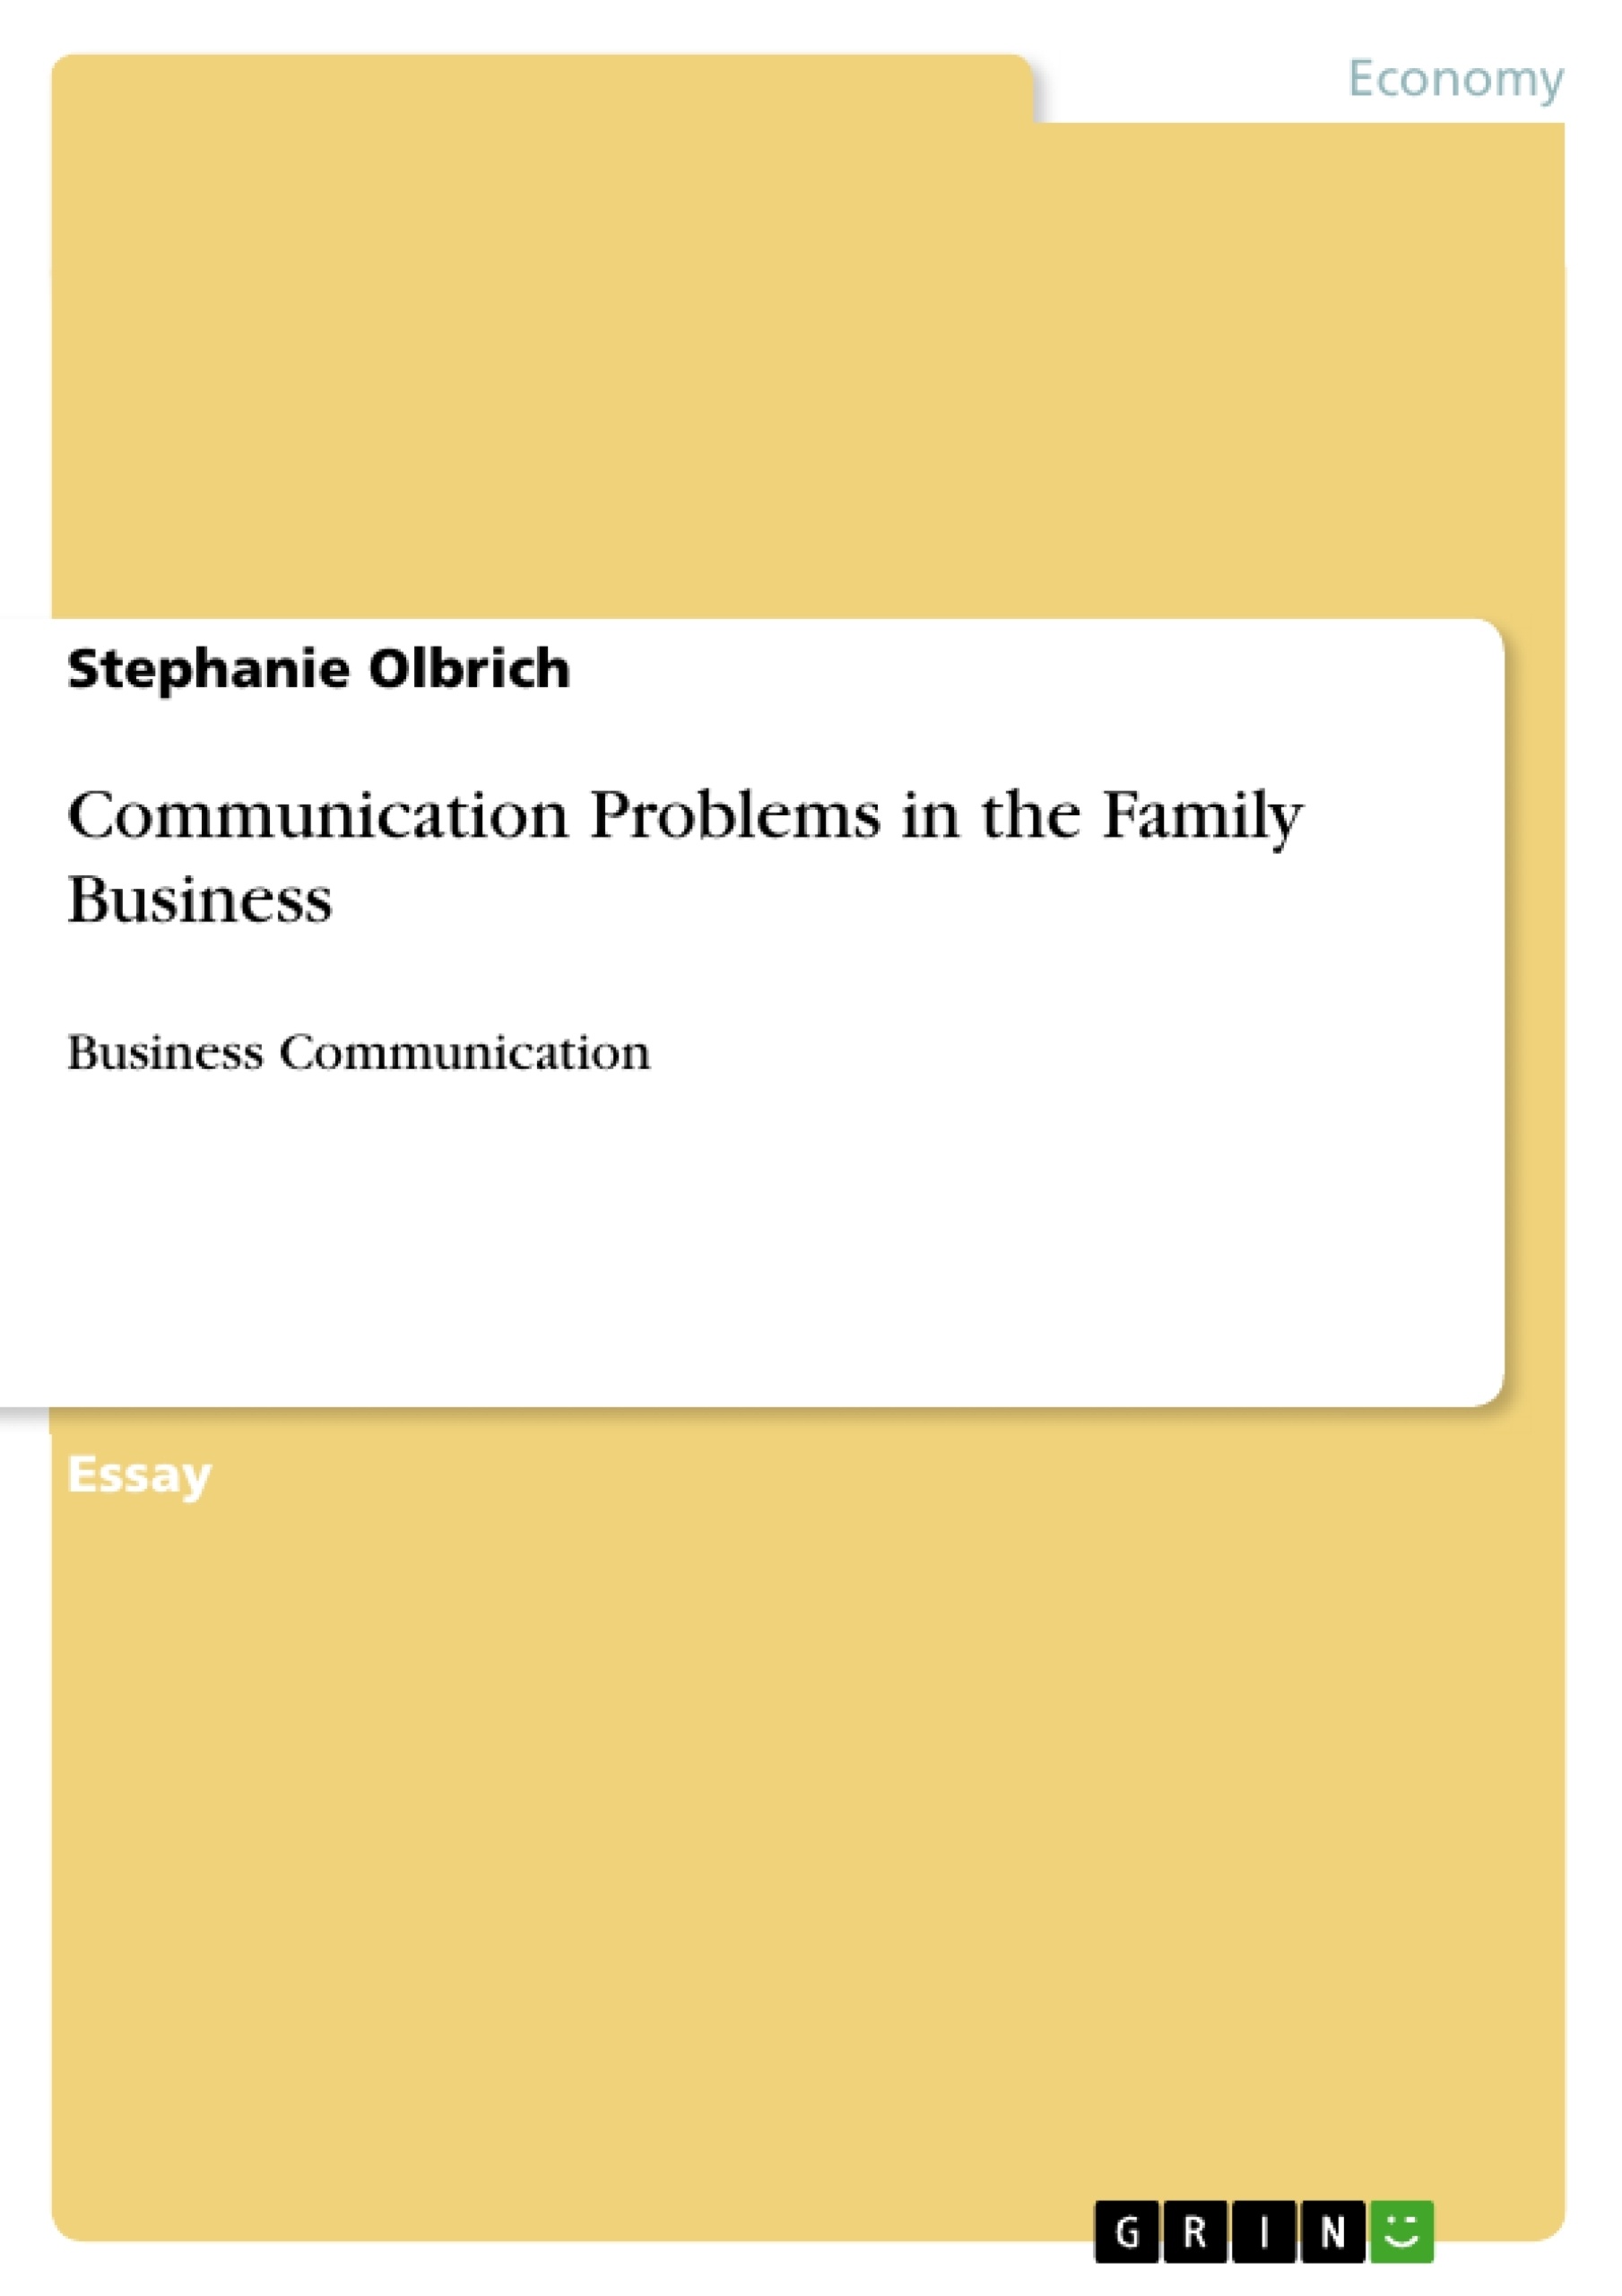 Title: Communication Problems in the Family Business